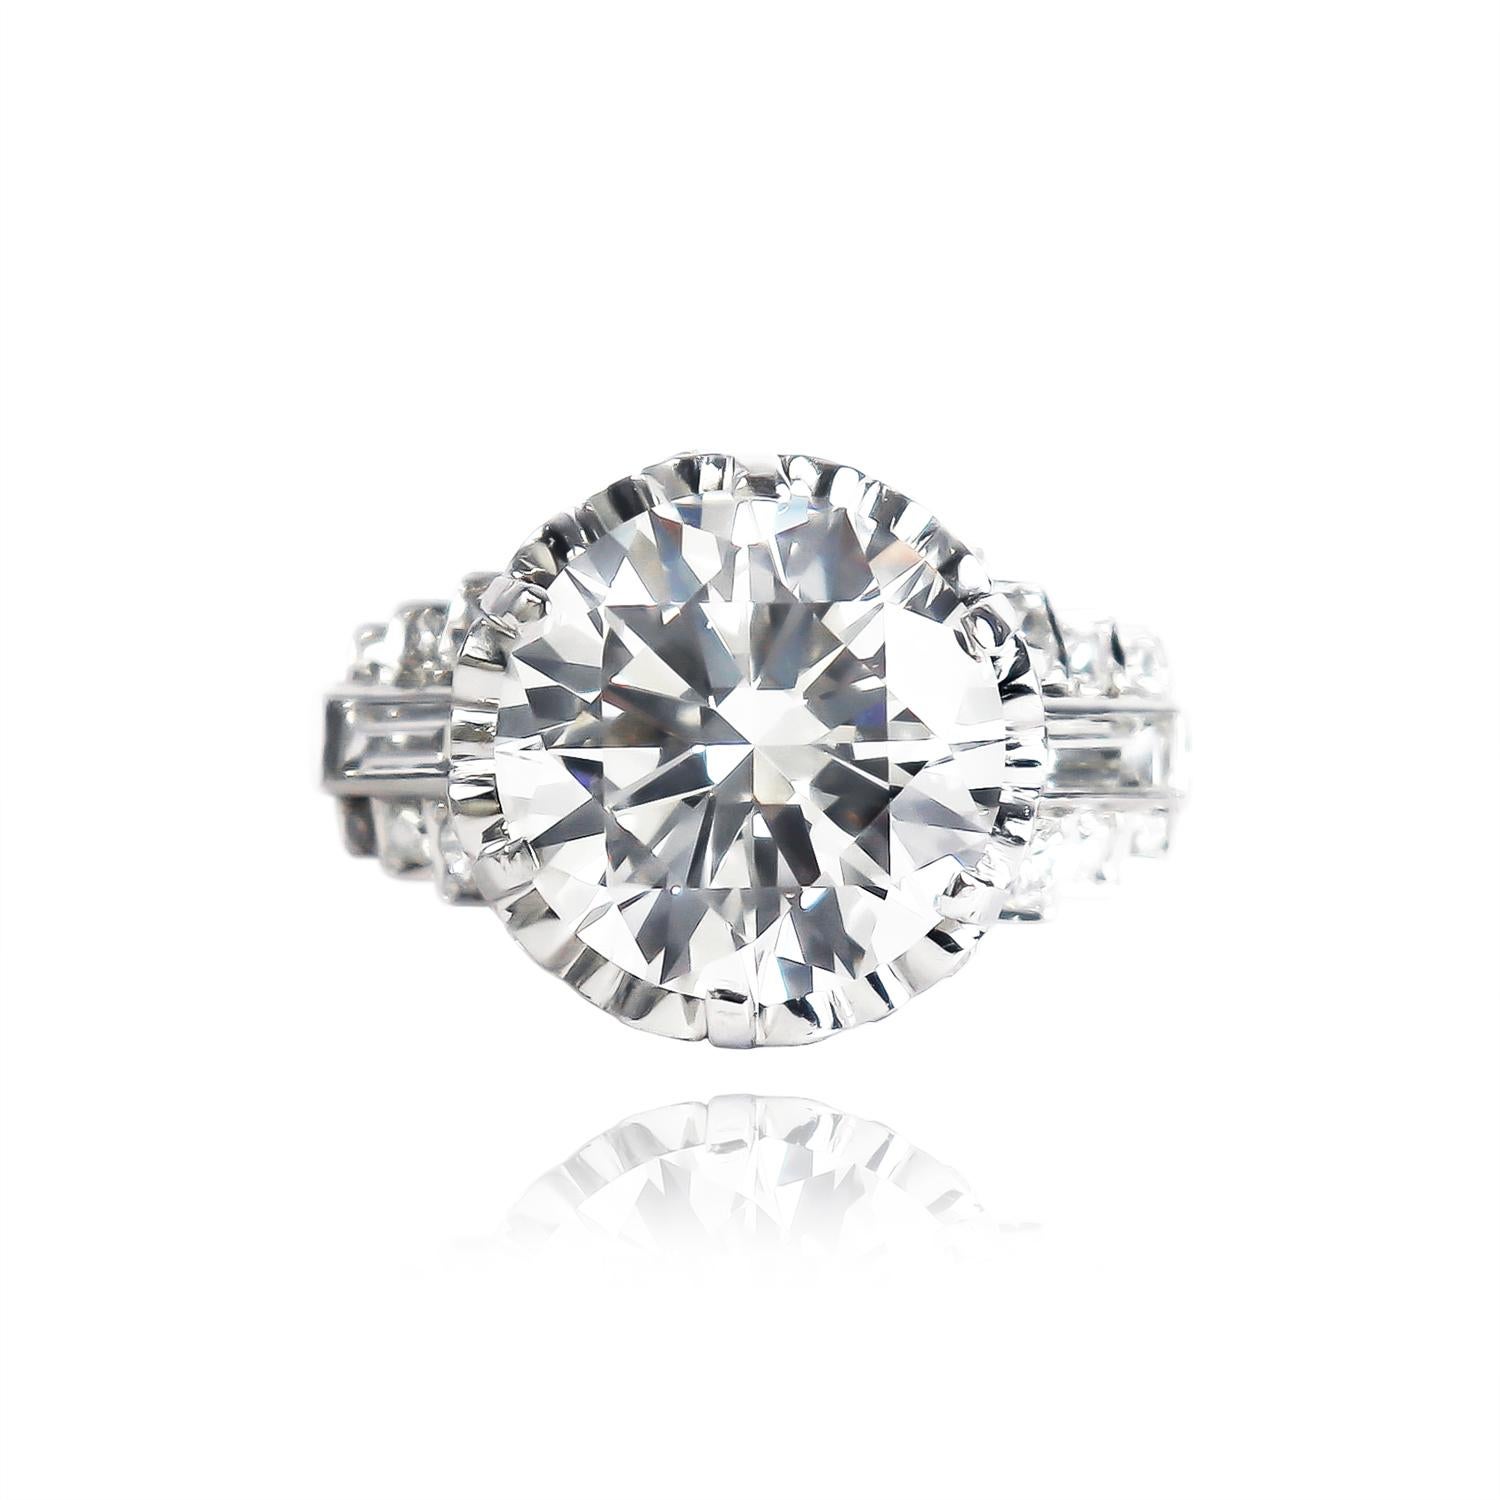 This incredible, recently-restored, vintage piece from the J. Birnbach collection features a GIA certified 4.51 carat round brilliant diamond of I color and SI1 clarity. Set in a phenomenal vintage mounting with straight baguettes and assorted